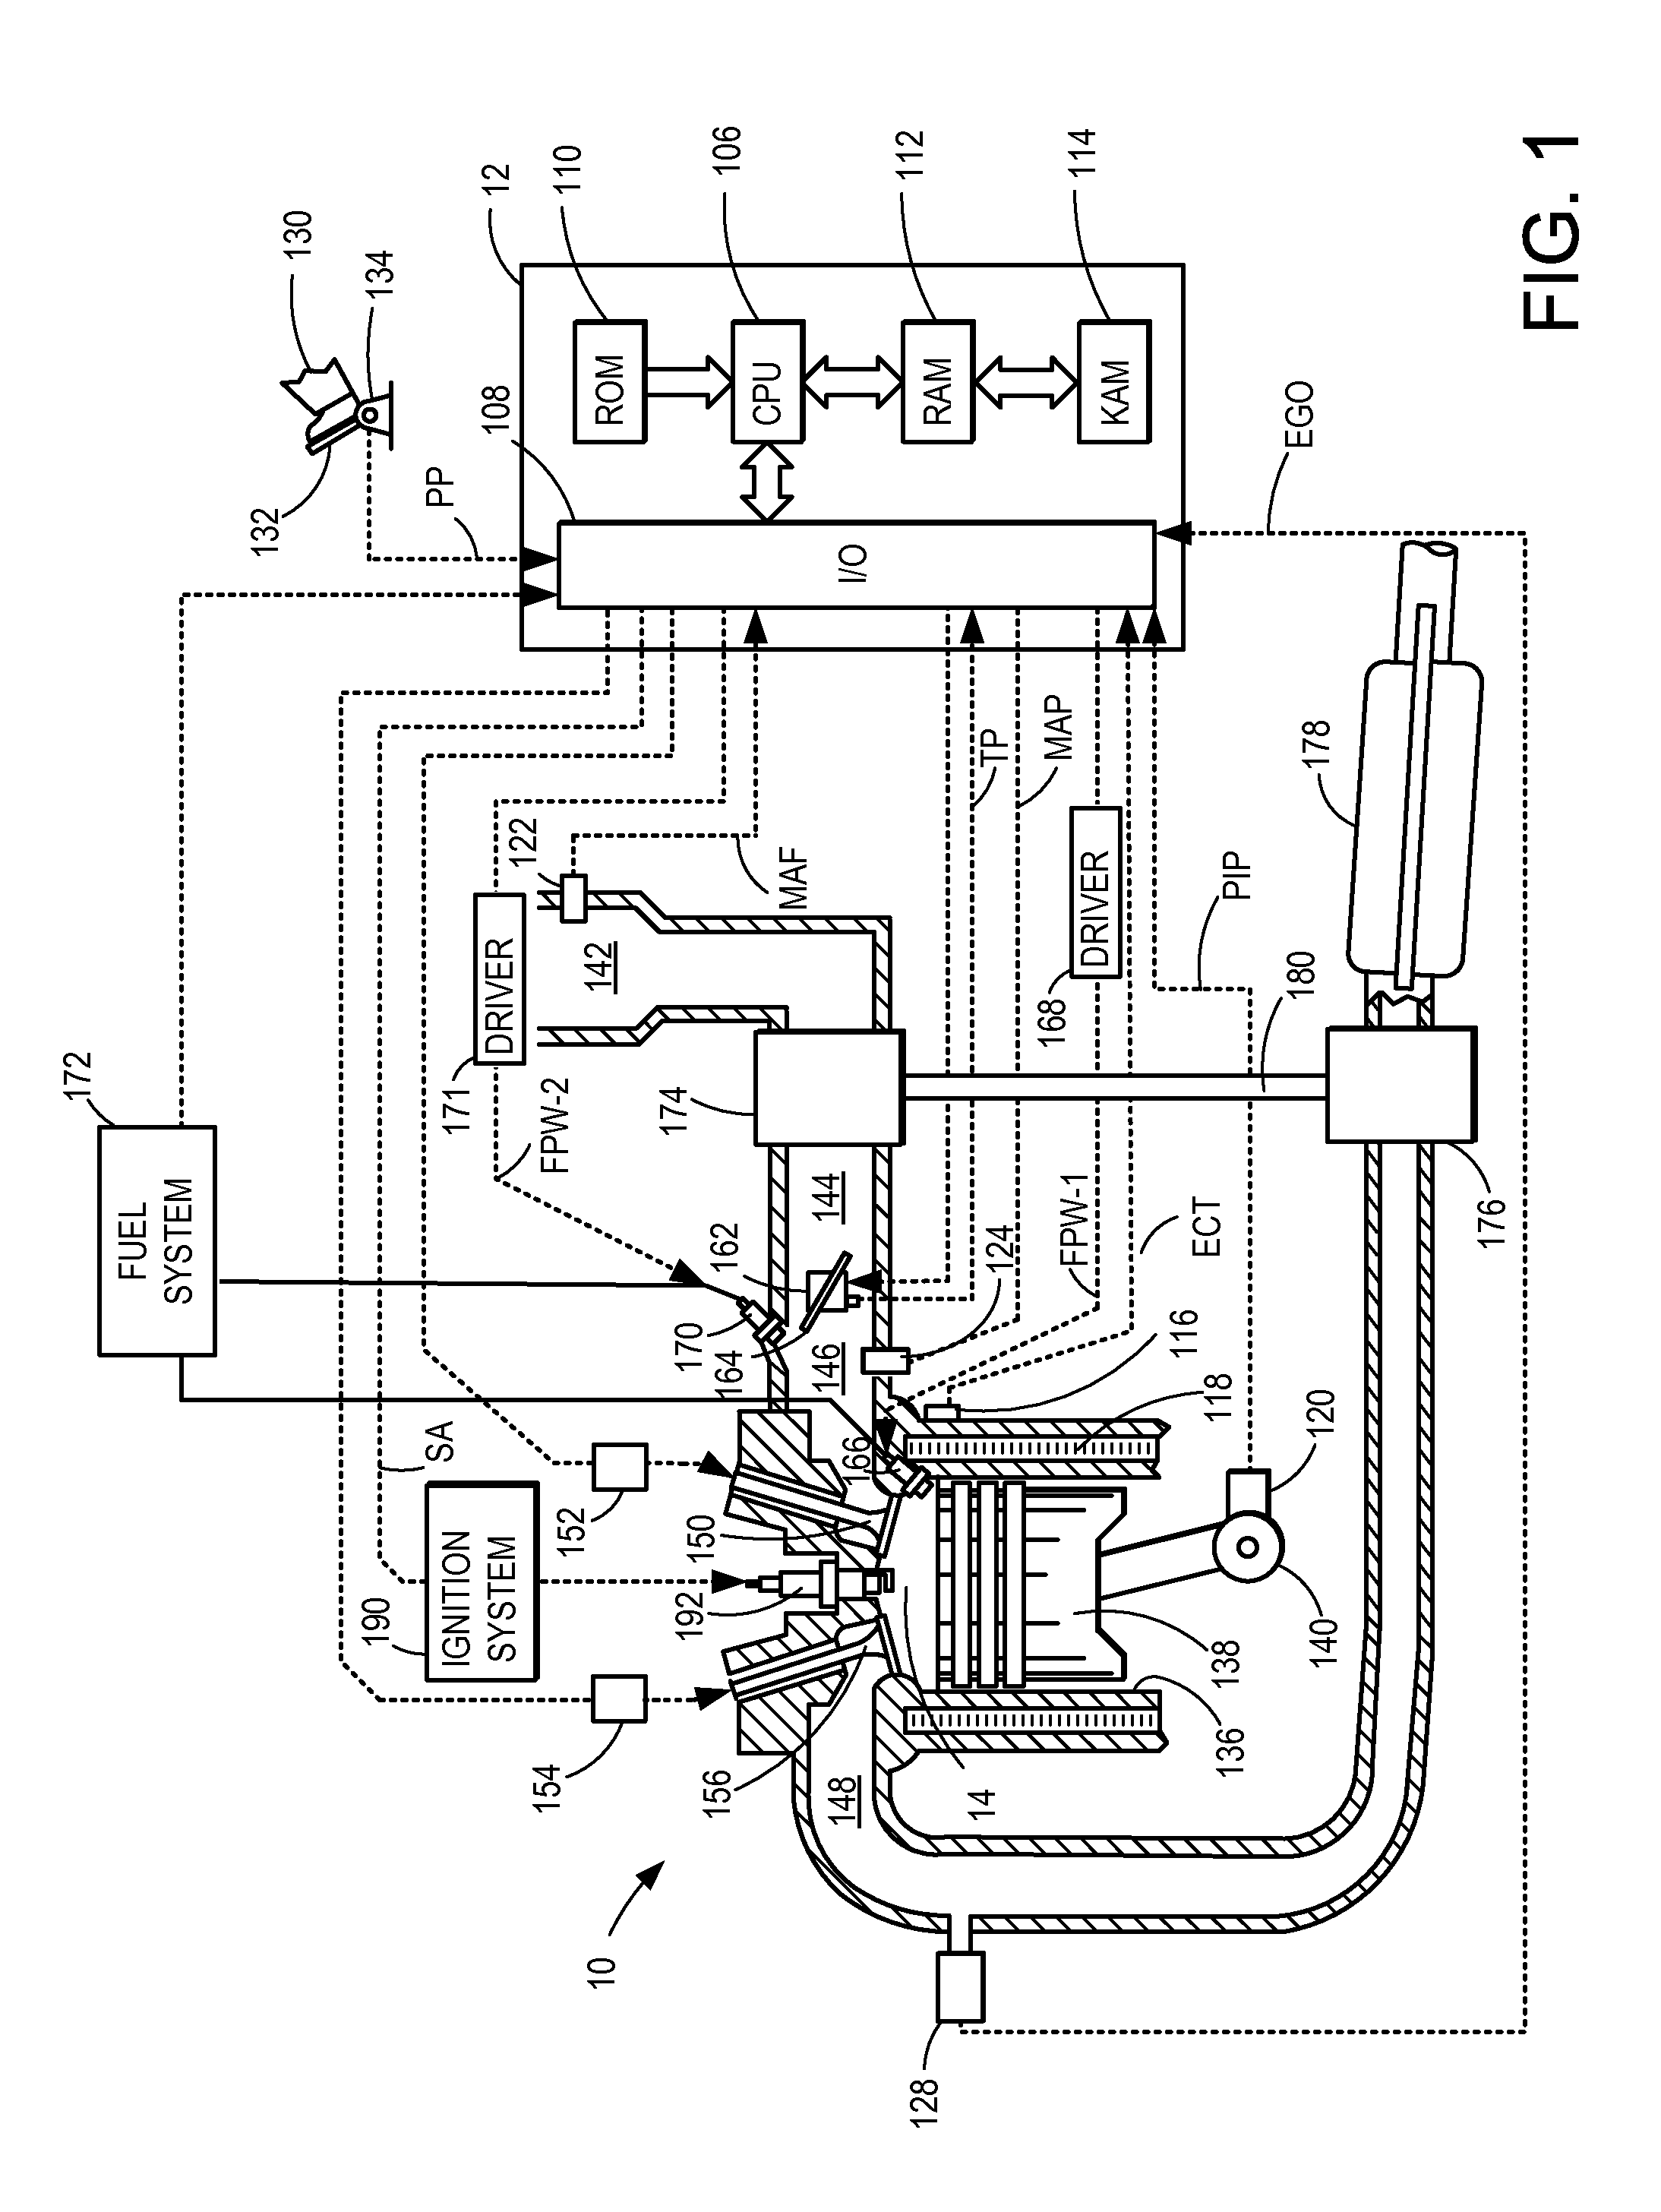 Direct injection of diluents or secondary fuels in gaseous fuel engines